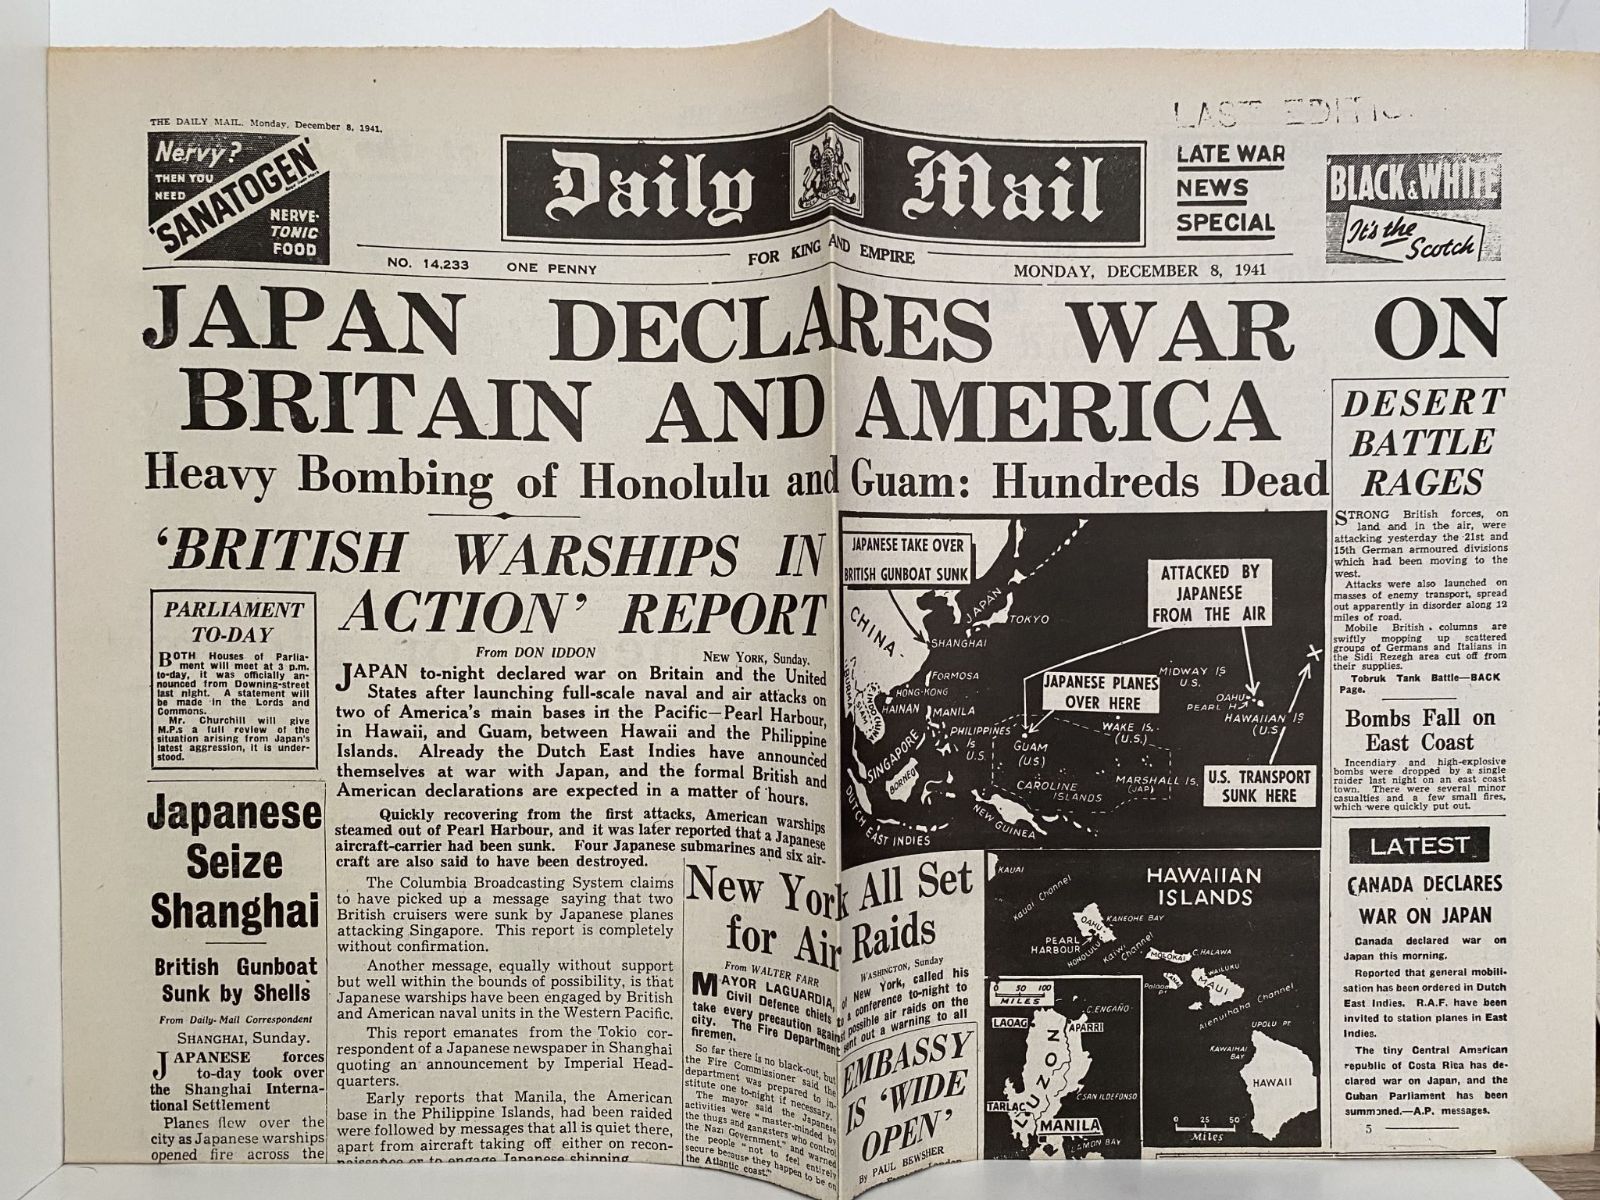 OLD WARTIME NEWSPAPER: Daily Mail, Monday 8th December 1941